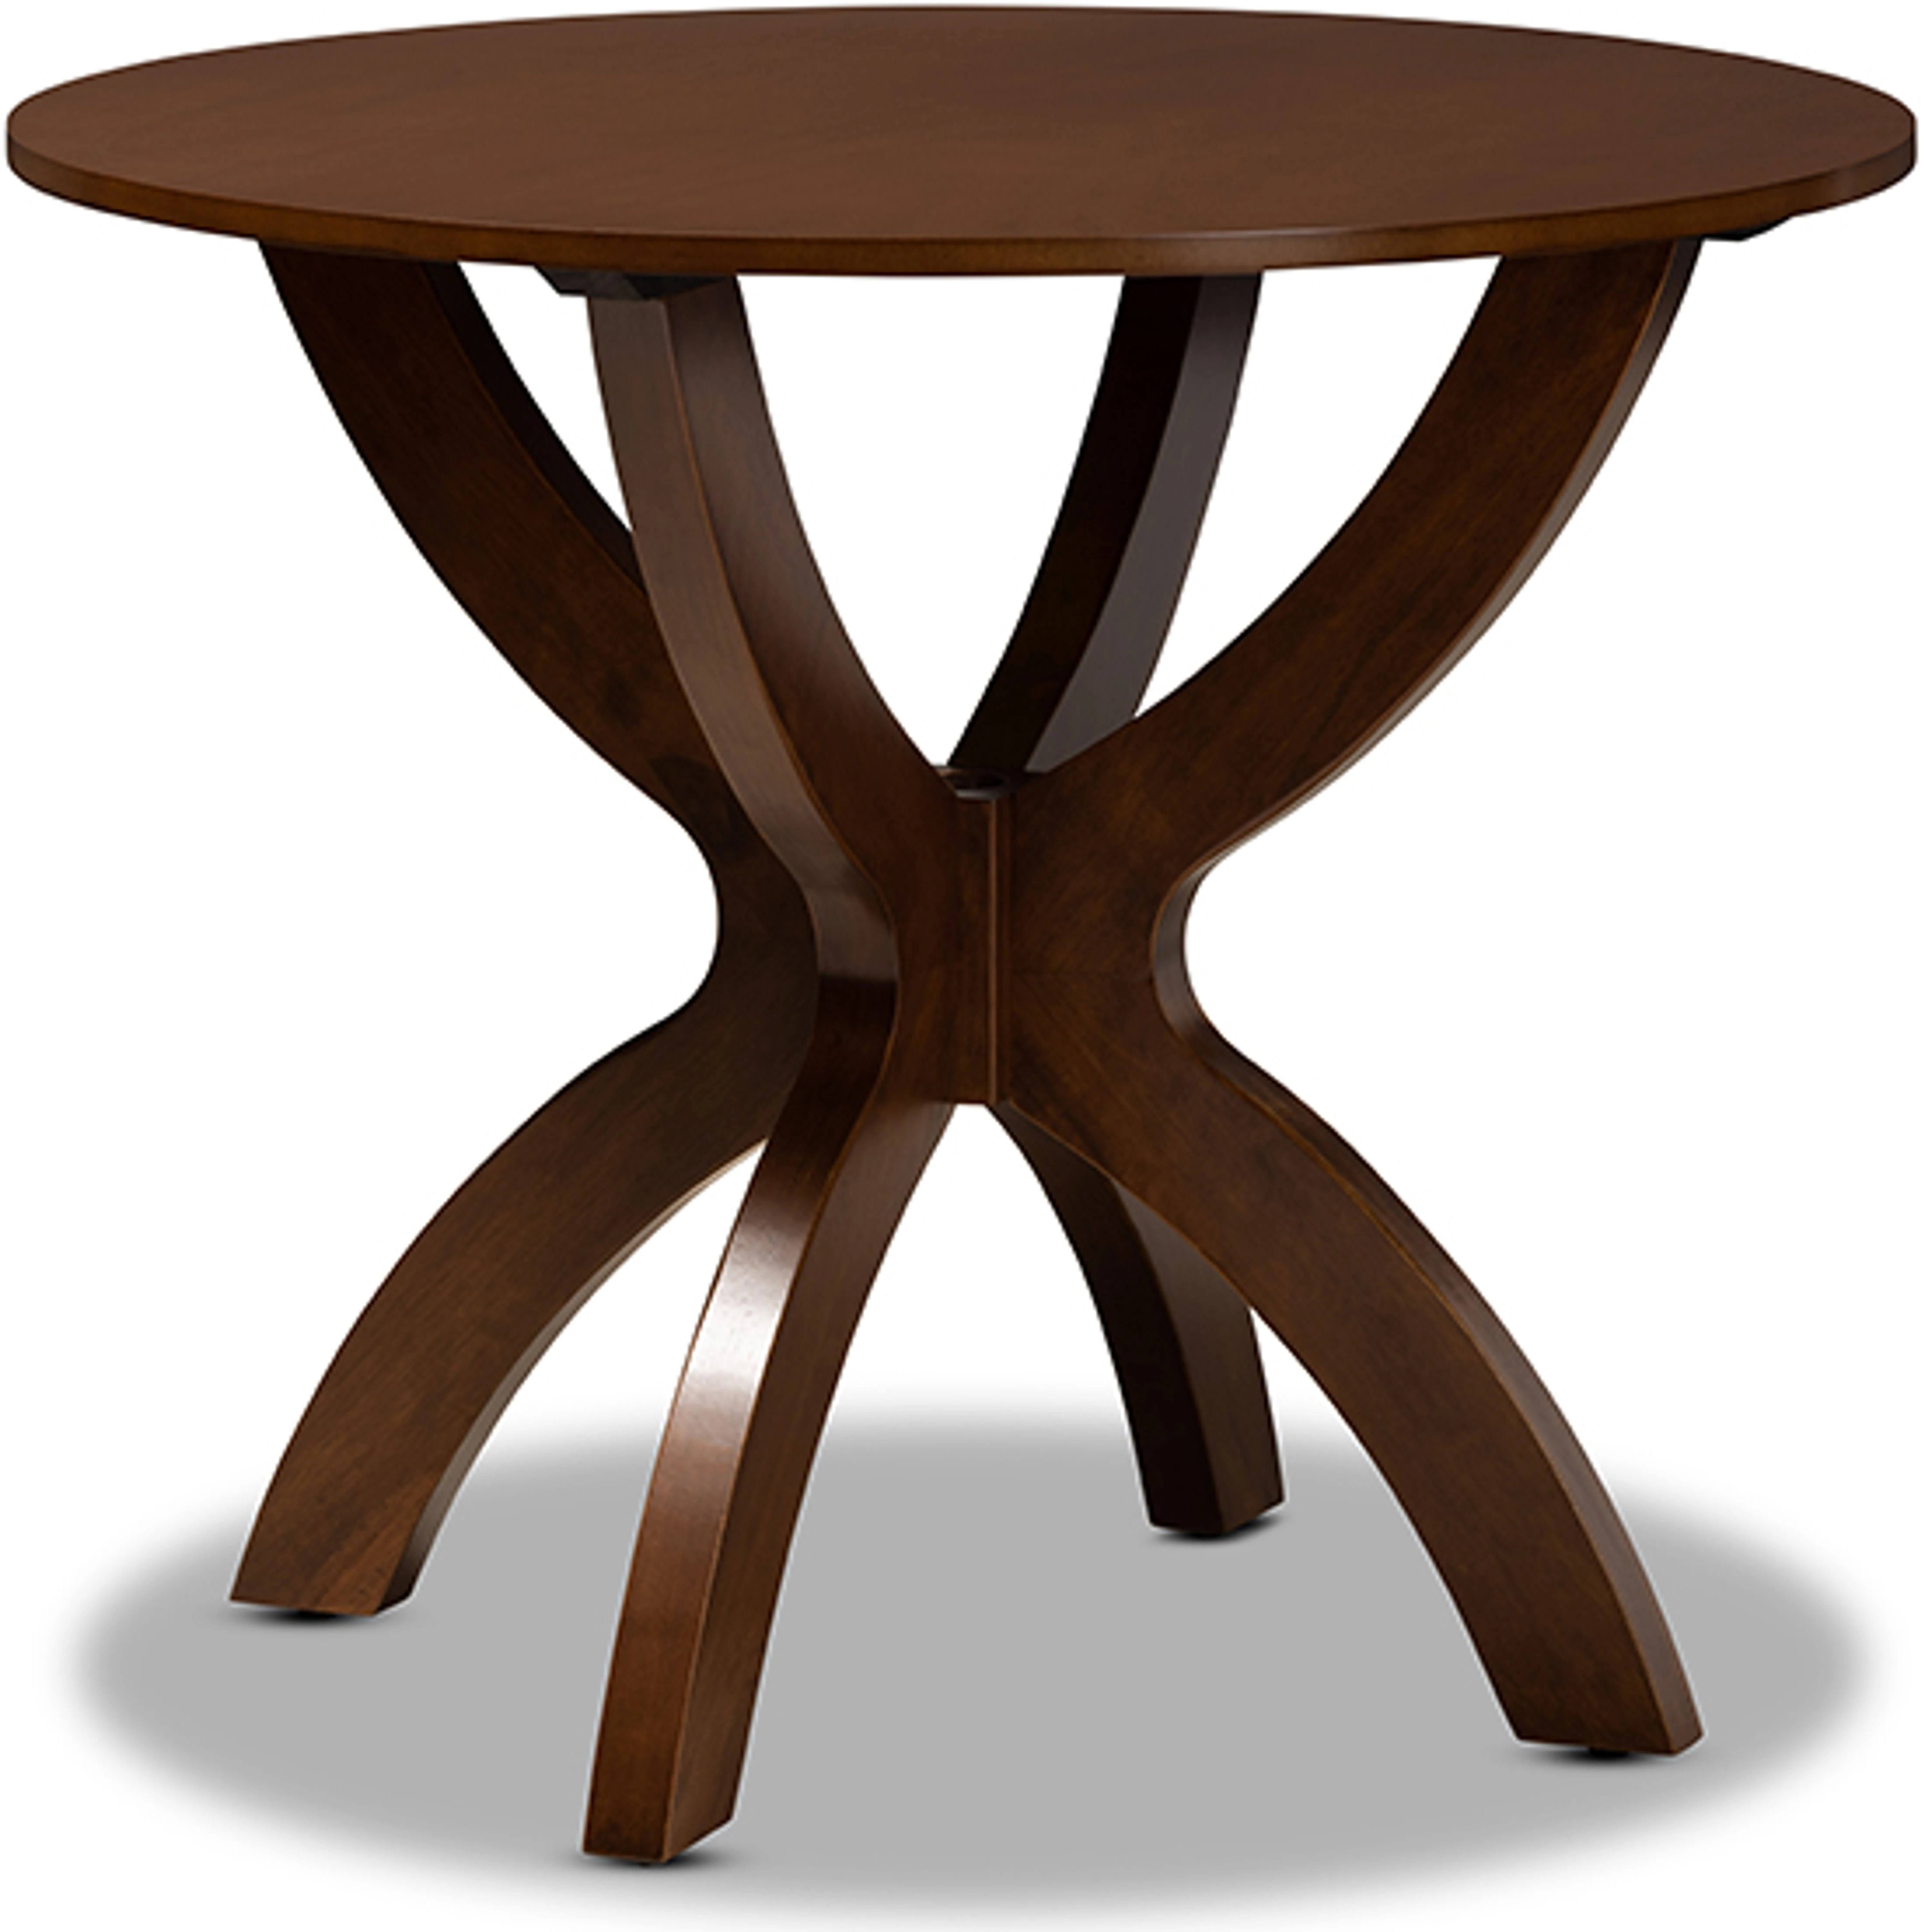 Modern Round Walnut Dining Table with Sculptural Base | Image